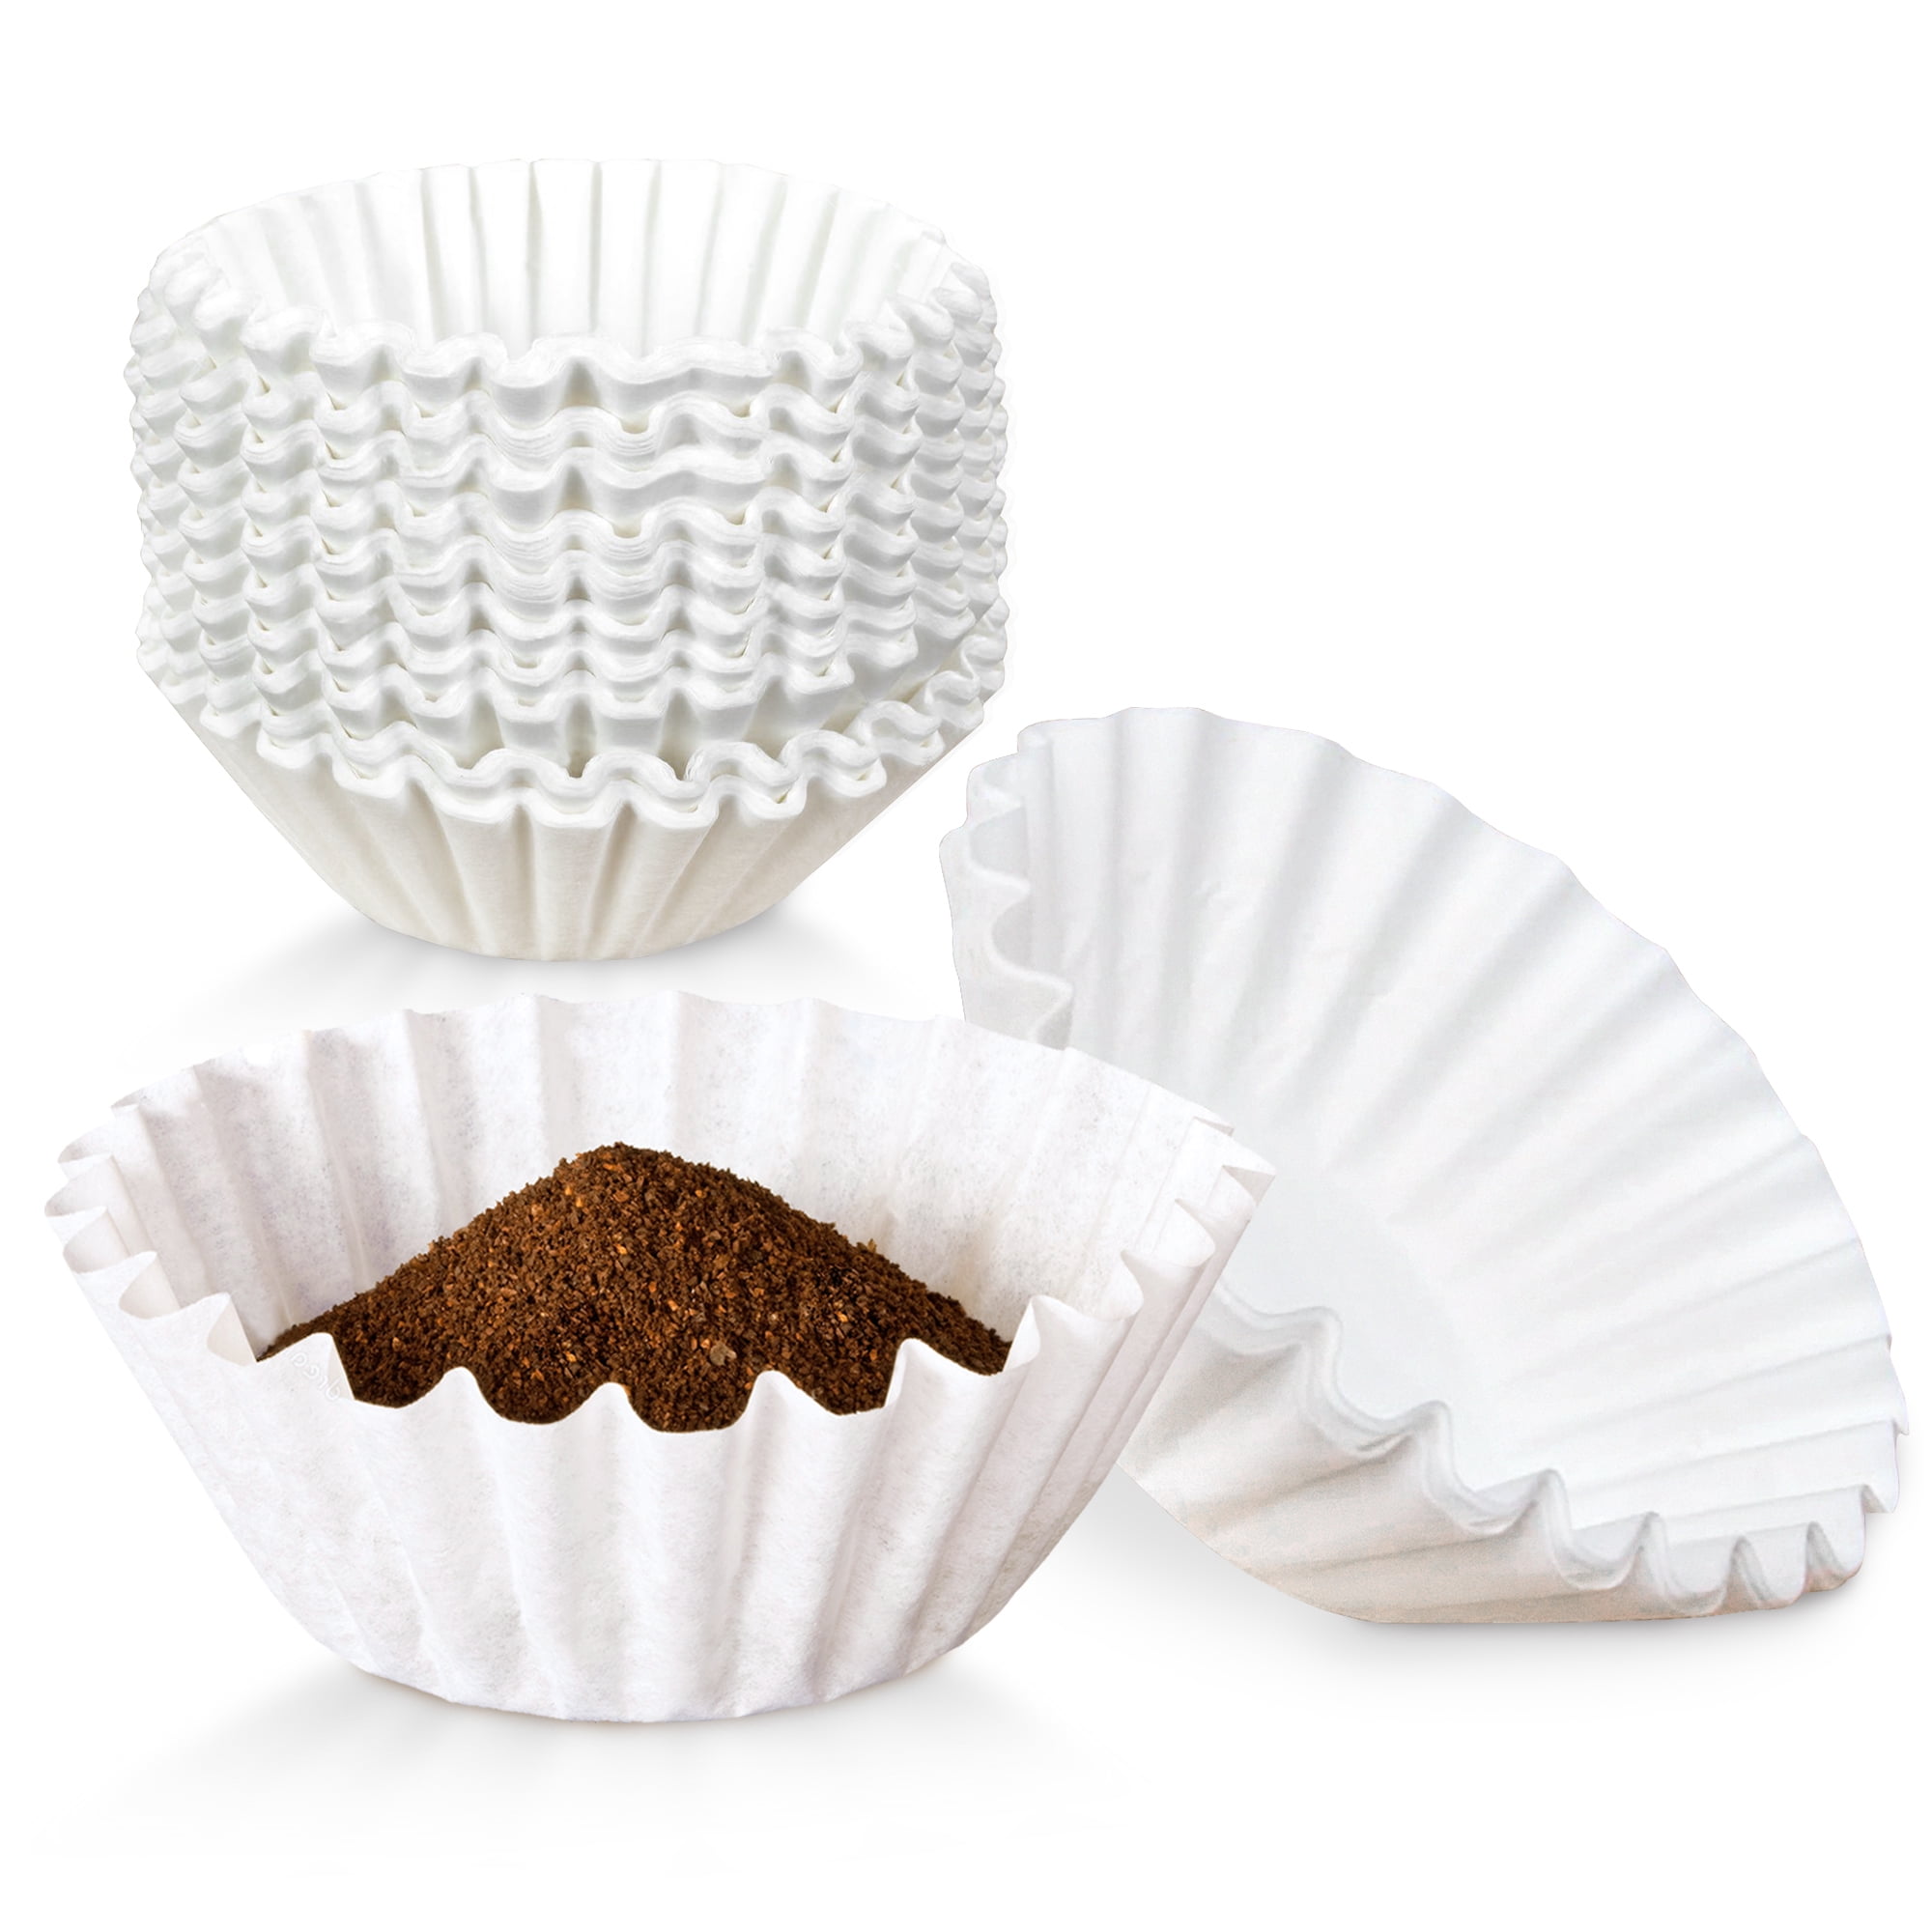 White {Imported from Canada} Bunn 12 Cup Coffee Filters 20115.6-1000 Count